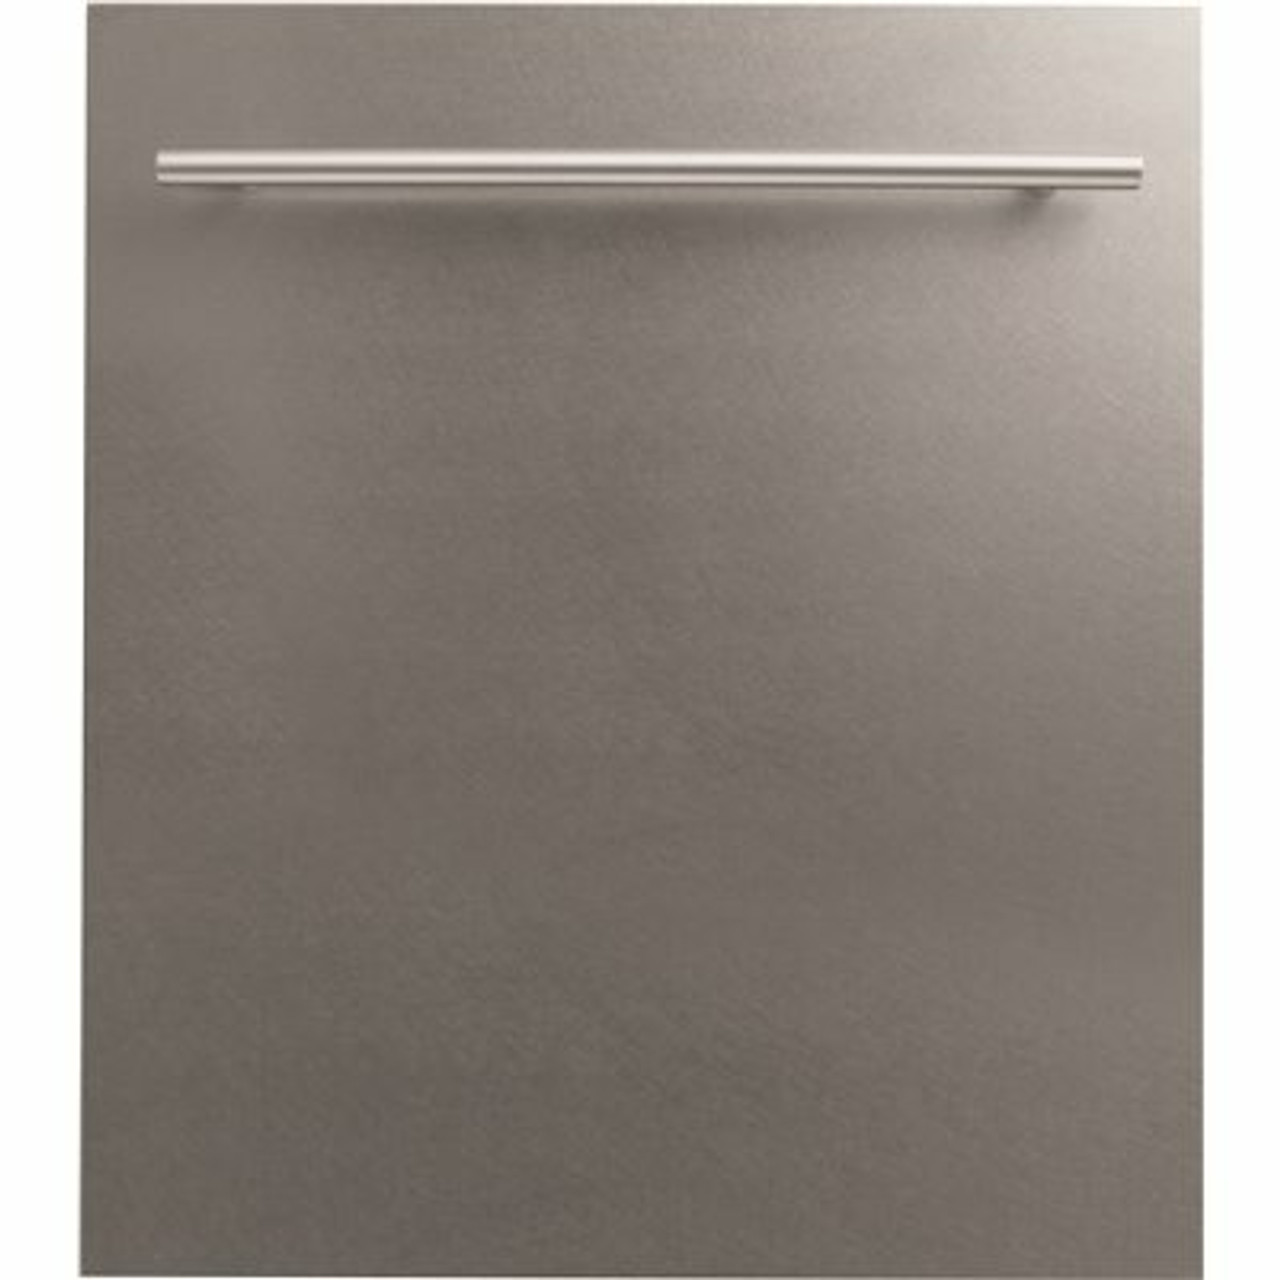 Zline 24 In. Durasnow Top Control Dishwasher With Stainless Steel Tub And Modern Style Handle, 40Dba (Dw-Sn-24)